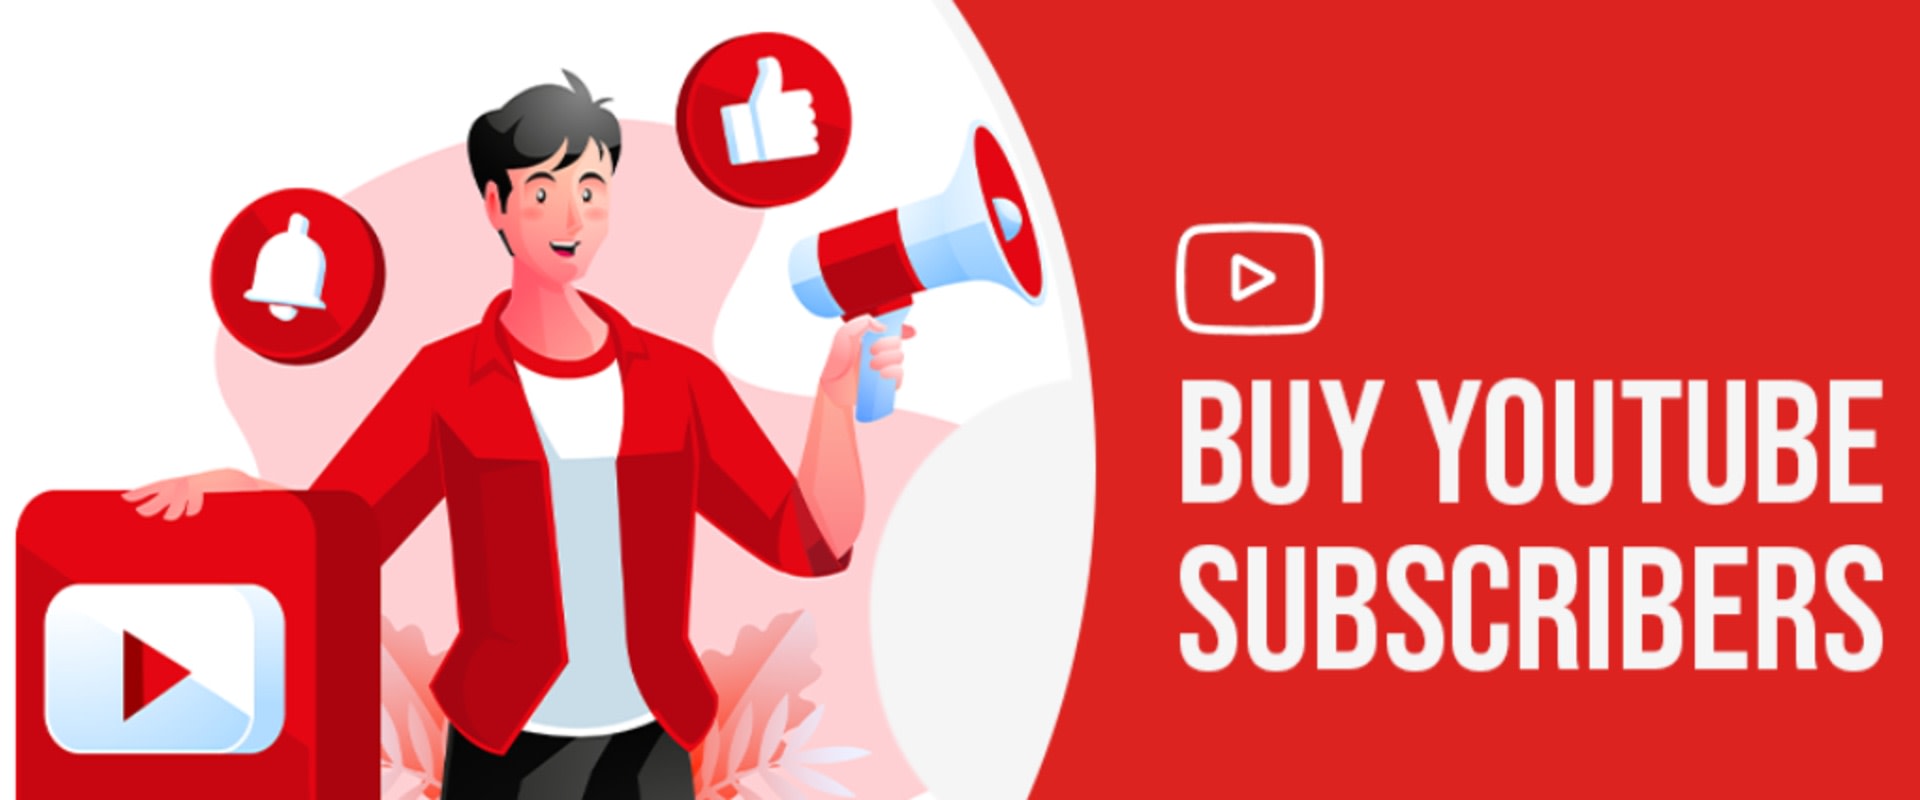 Deals for Buying YouTube Followers